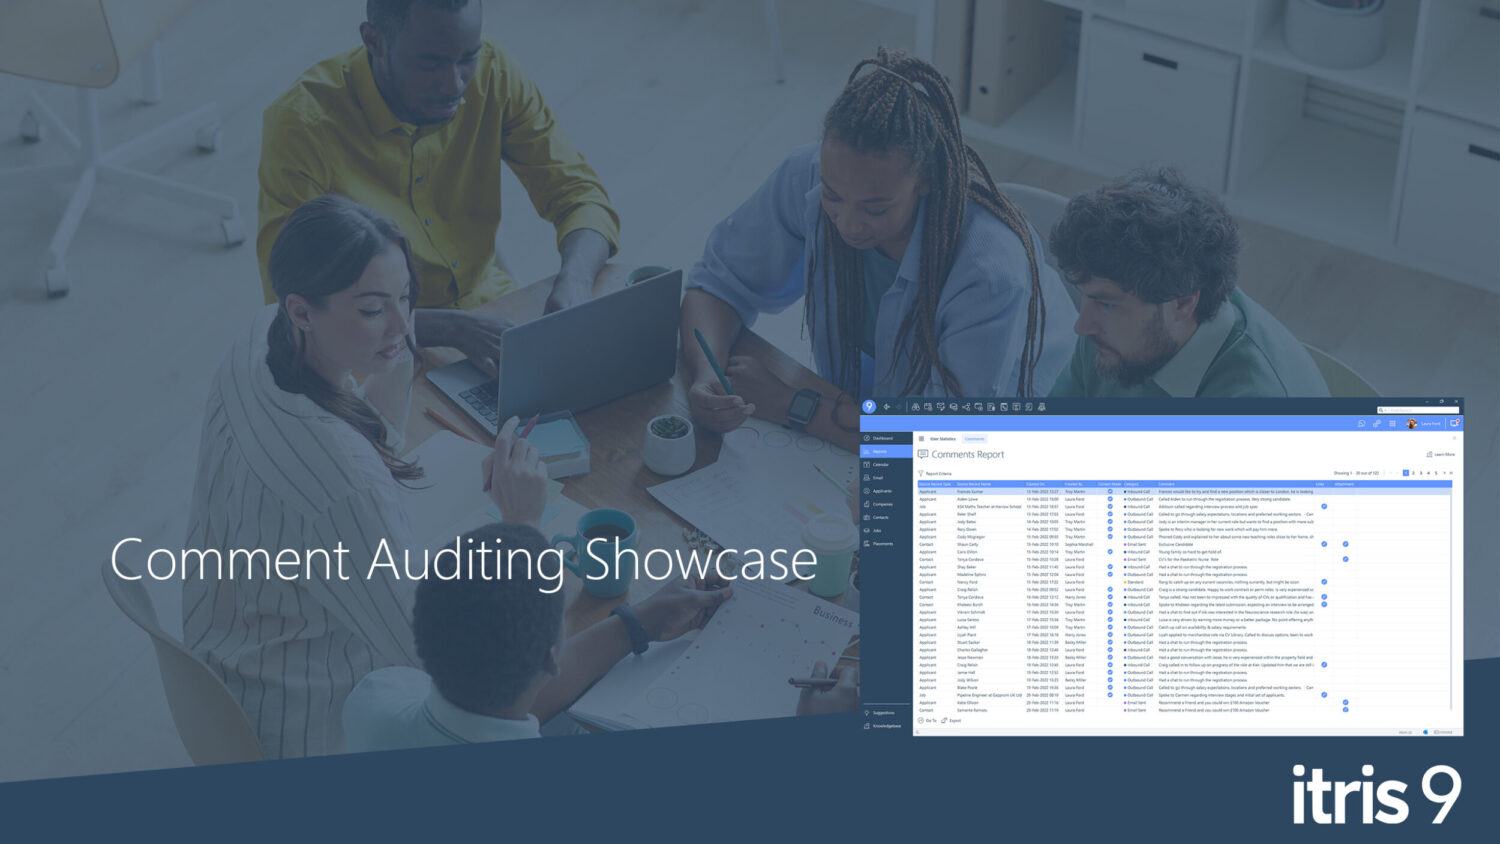 Recruitment CRM software itris 9 | Comment Auditing | Showcase Video